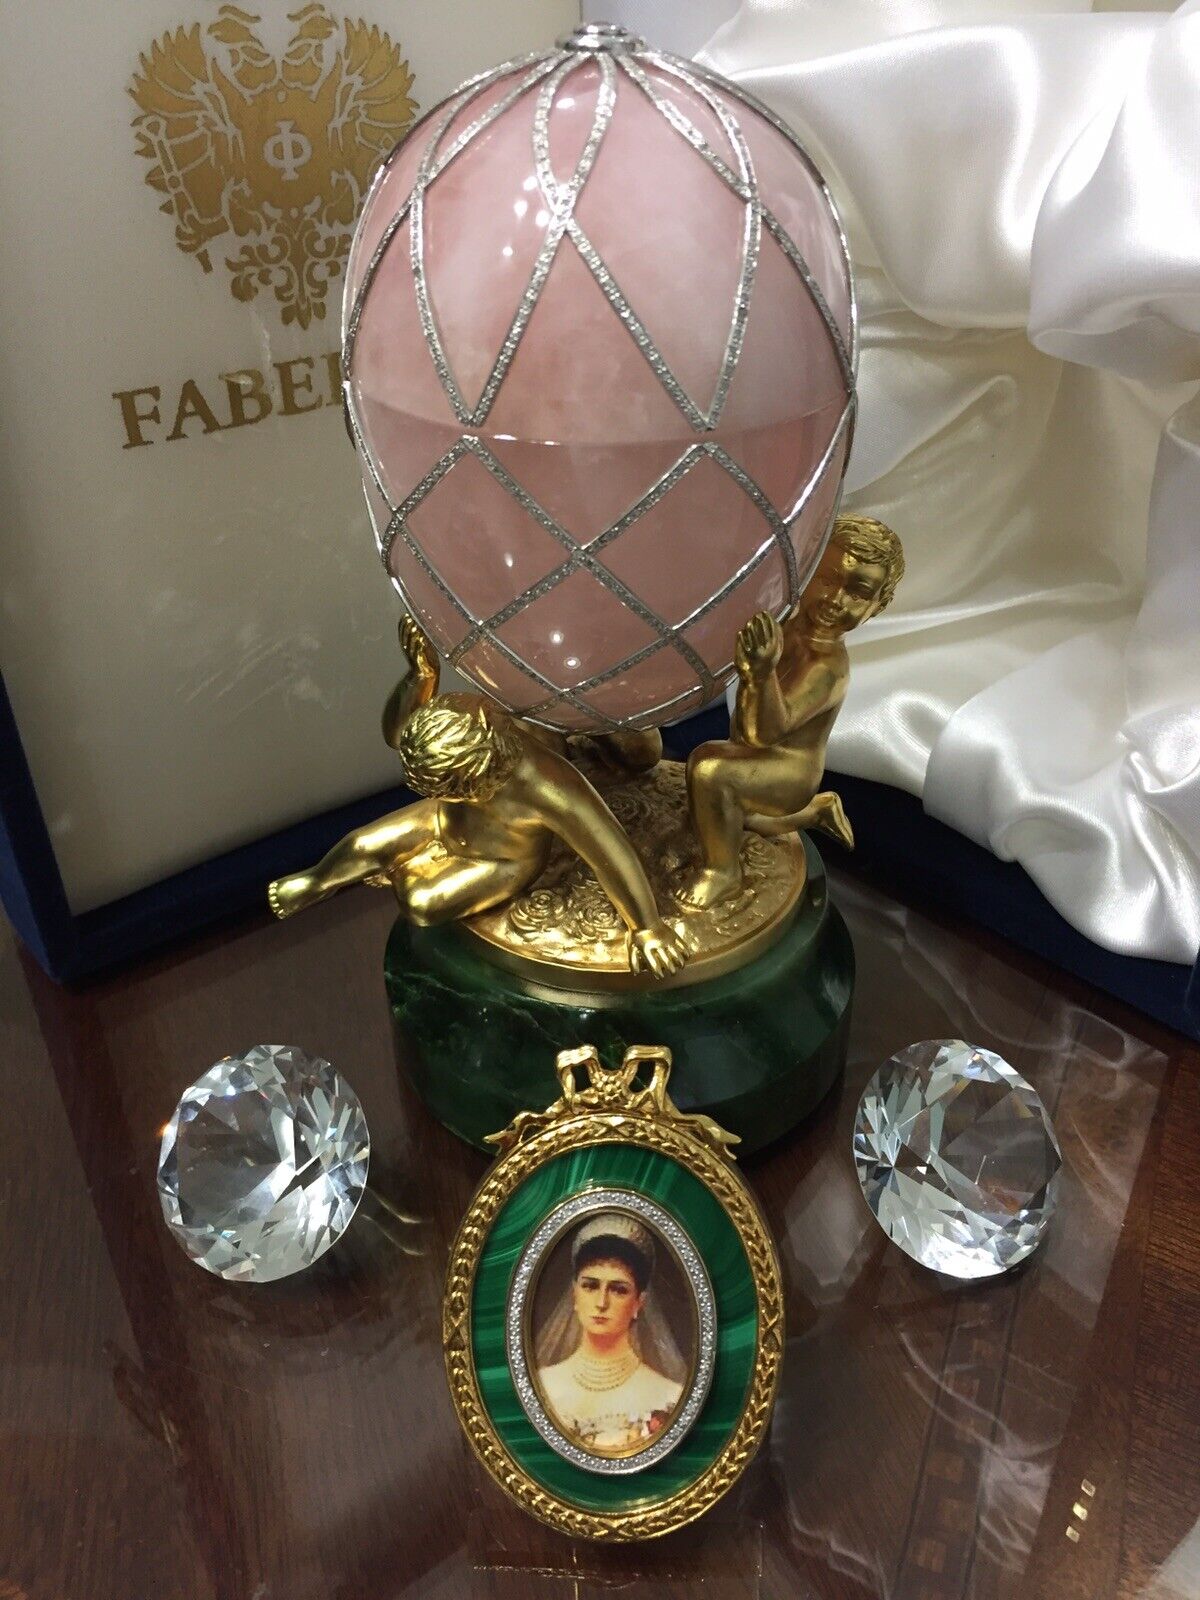 FABERGE IMPERIAL DIAMOND TRELLIS EGG - LIMITED EDITION